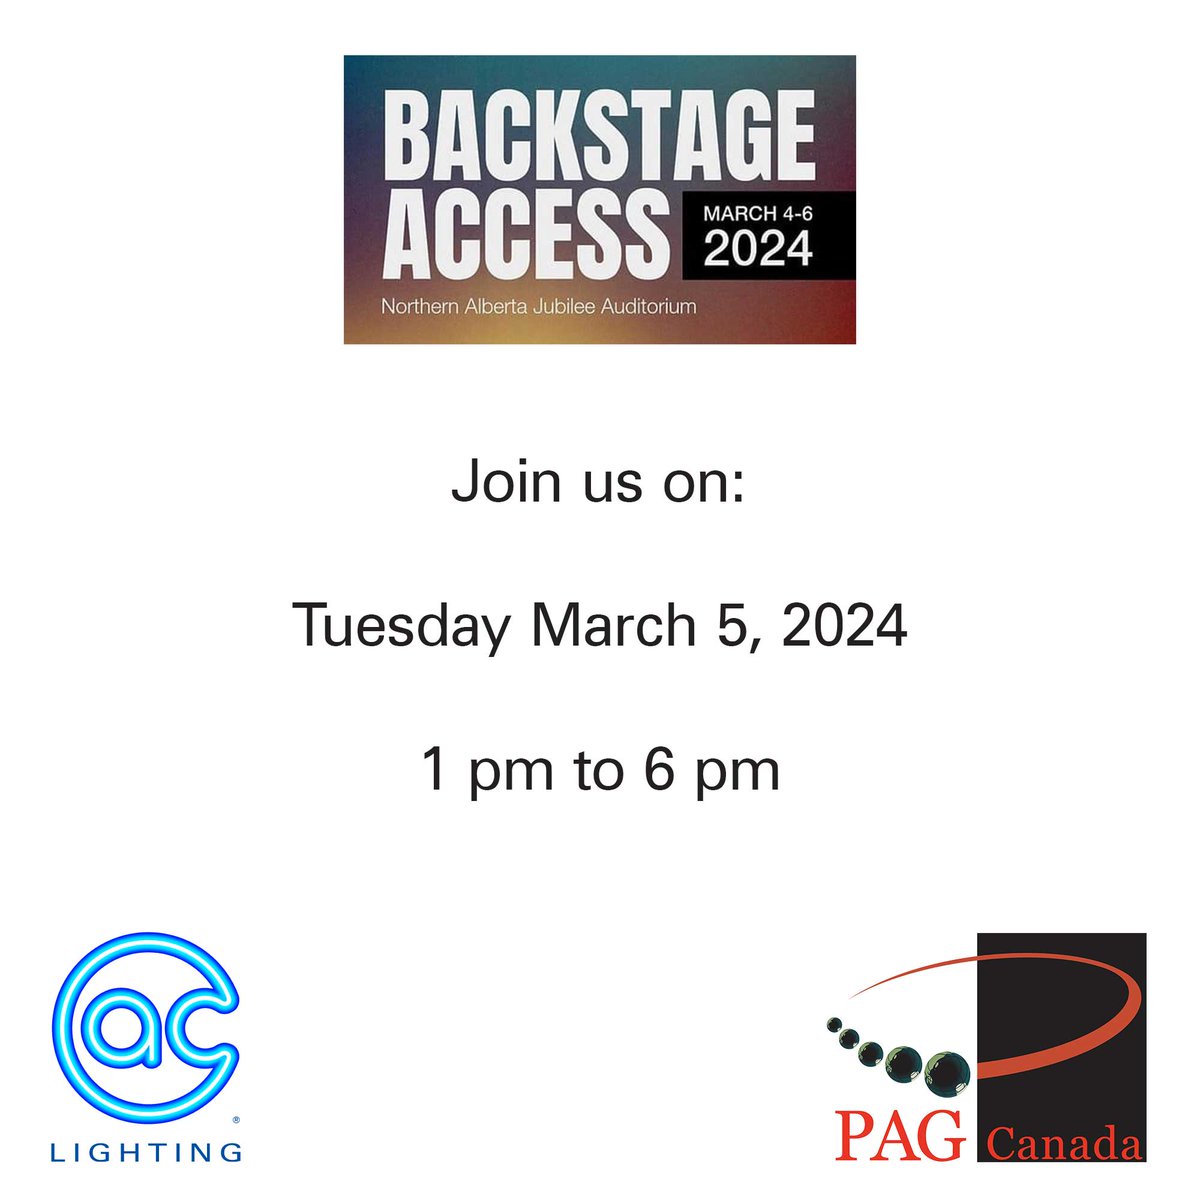 Join @PAGCanada1 #BackstageAccess tomorrow from 1 pm to 5 pm #NorthernAlbertaJubileeAudutorium

Stop by to see:
@chromaqlighting 2inspire
@PROLIGHTS_media AstraHybrid330, EclFresnel CT+, EclPar IPMFC
@luminex_network GigaCore Series

Learn More: hubs.la/Q02n0lCx0